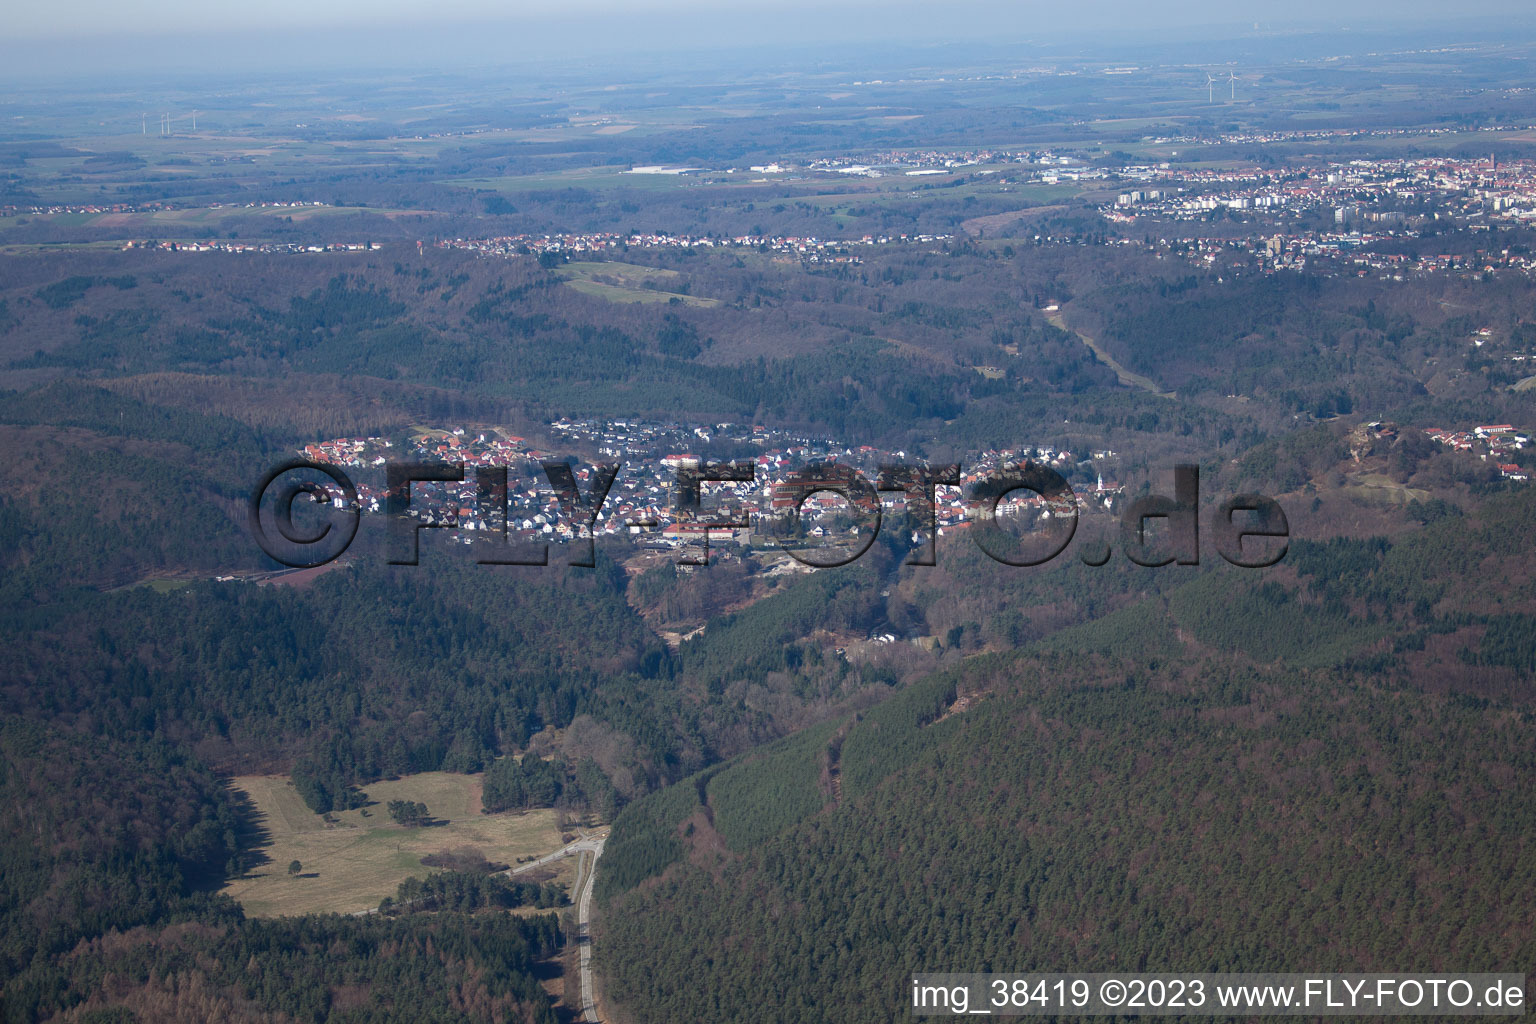 Drone recording of Lemberg in the state Rhineland-Palatinate, Germany